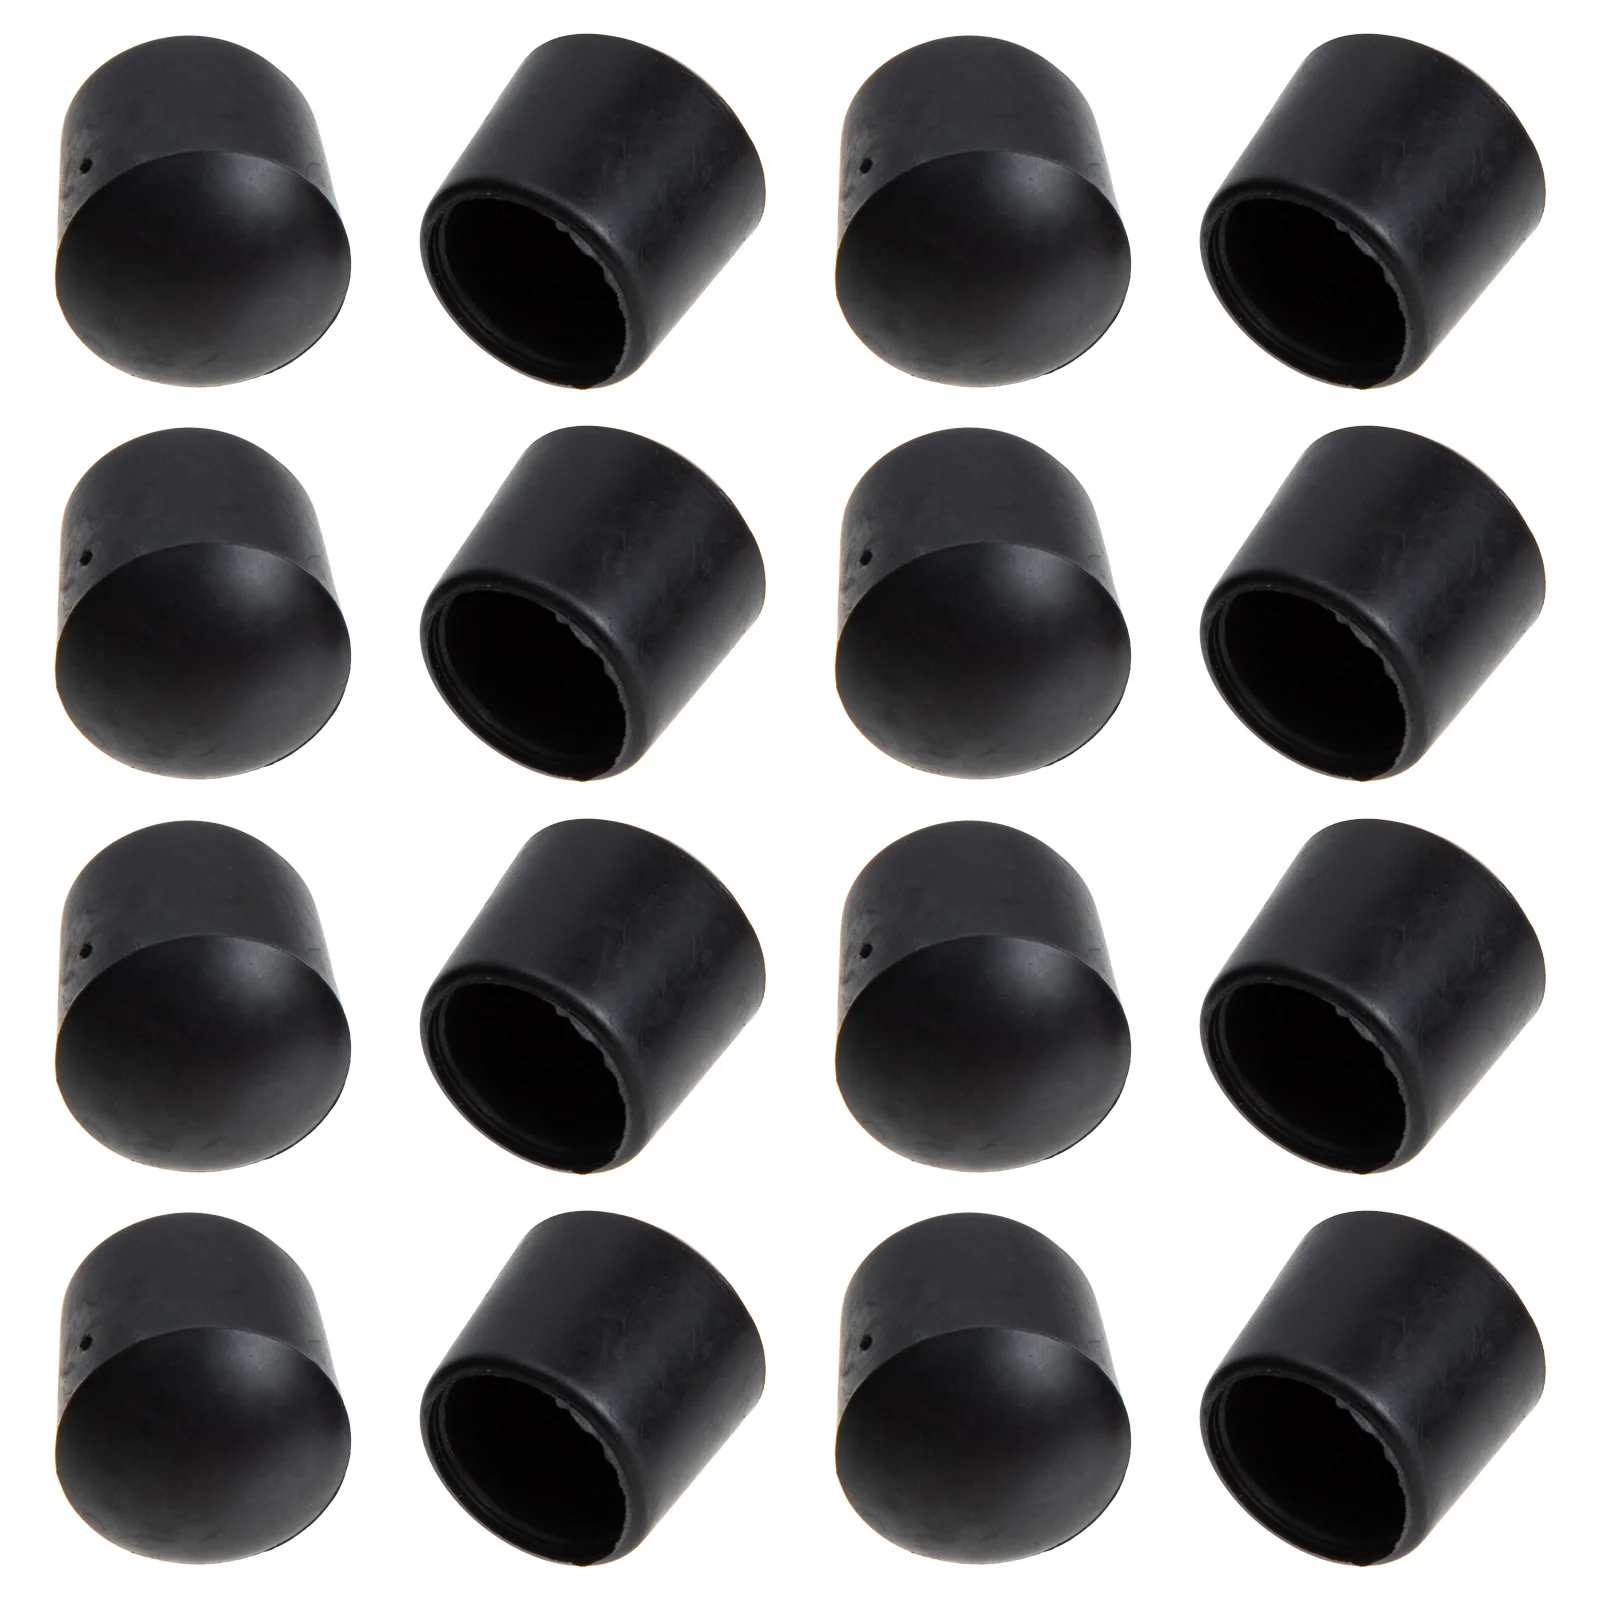 

Foosball Caps End Table Safety Soccer Machine Rubber Bearing Football Plug Tip Replacement Rod Cap Pole Cover Accessories